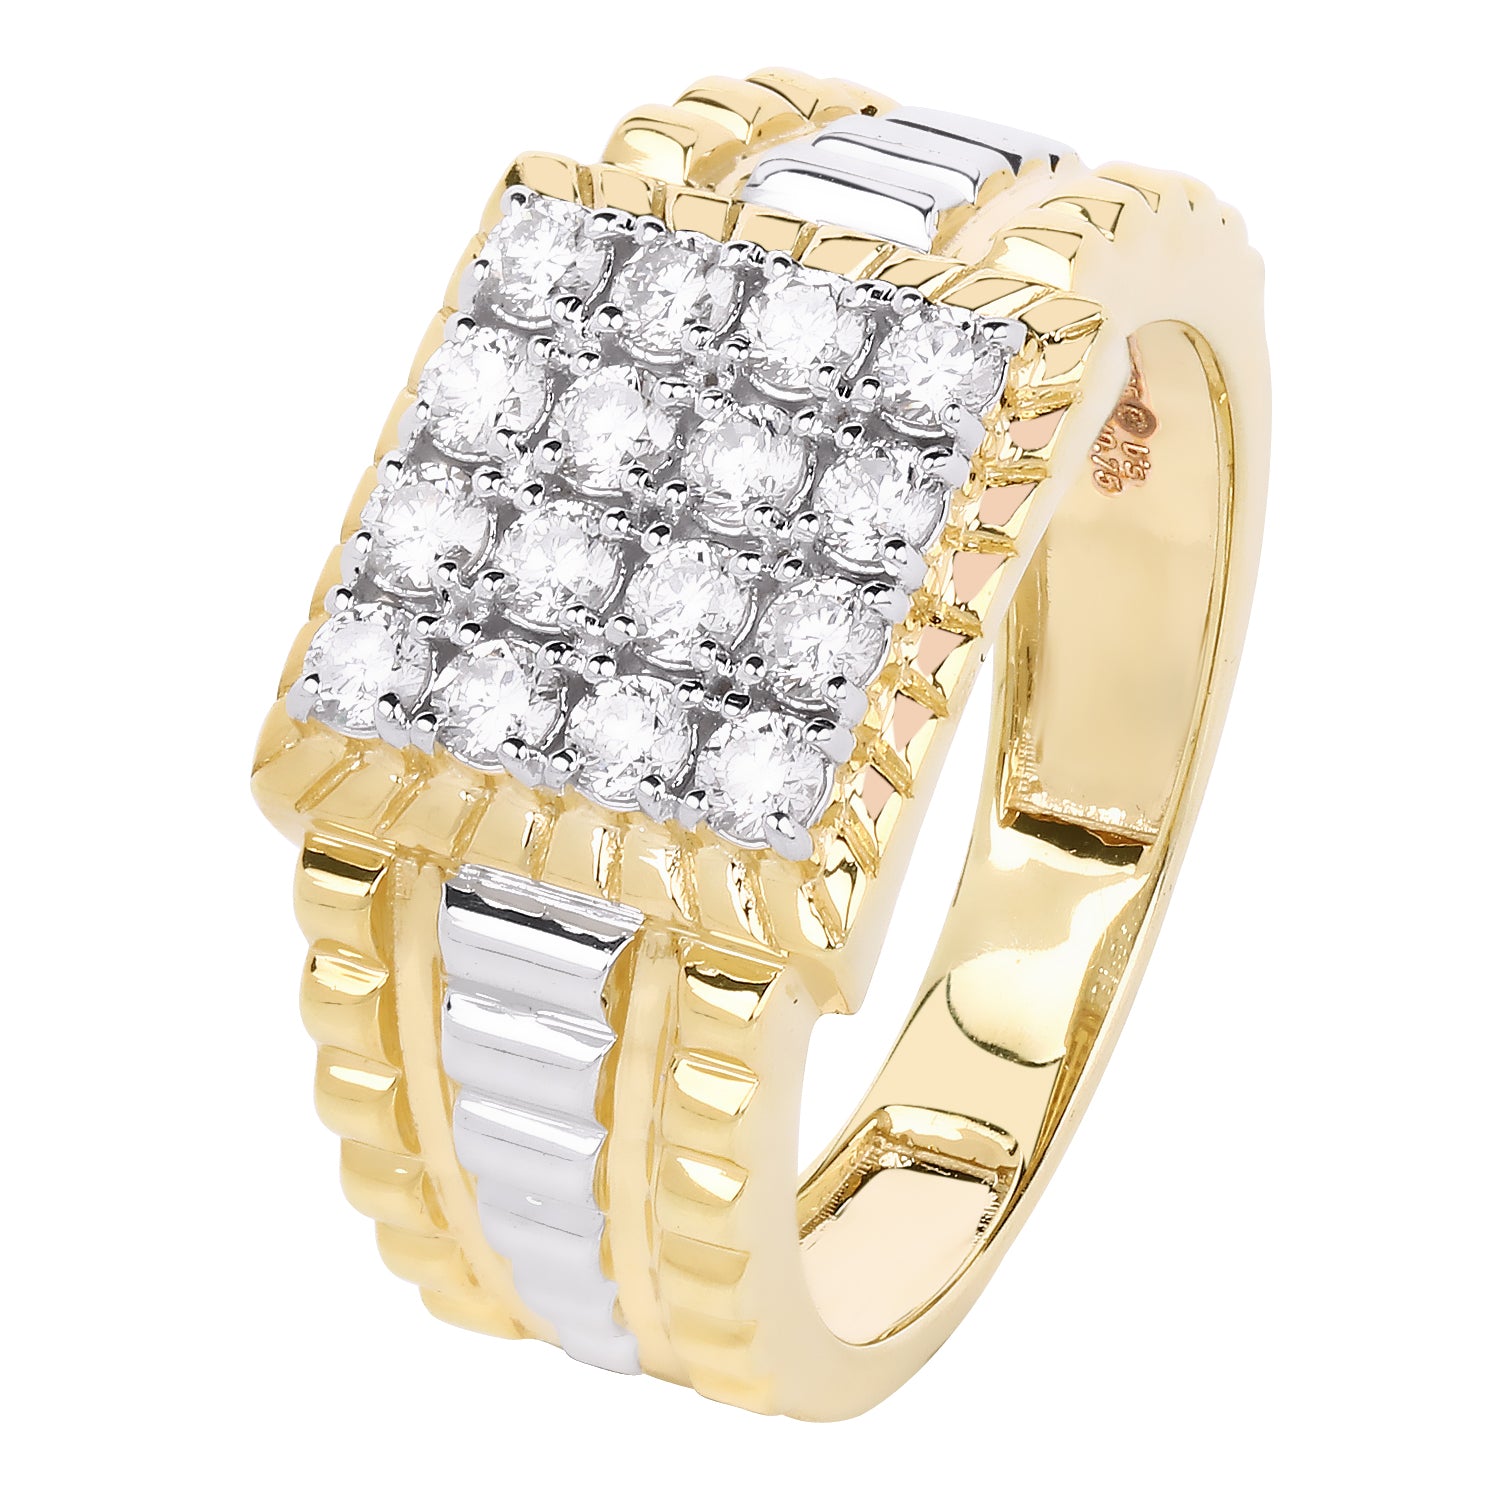 Amour 1/4 CT TW Diamond Octagonal Men's Ring In 10K White and Yellow Gold  JMS006953-9 - Jewelry - Jomashop